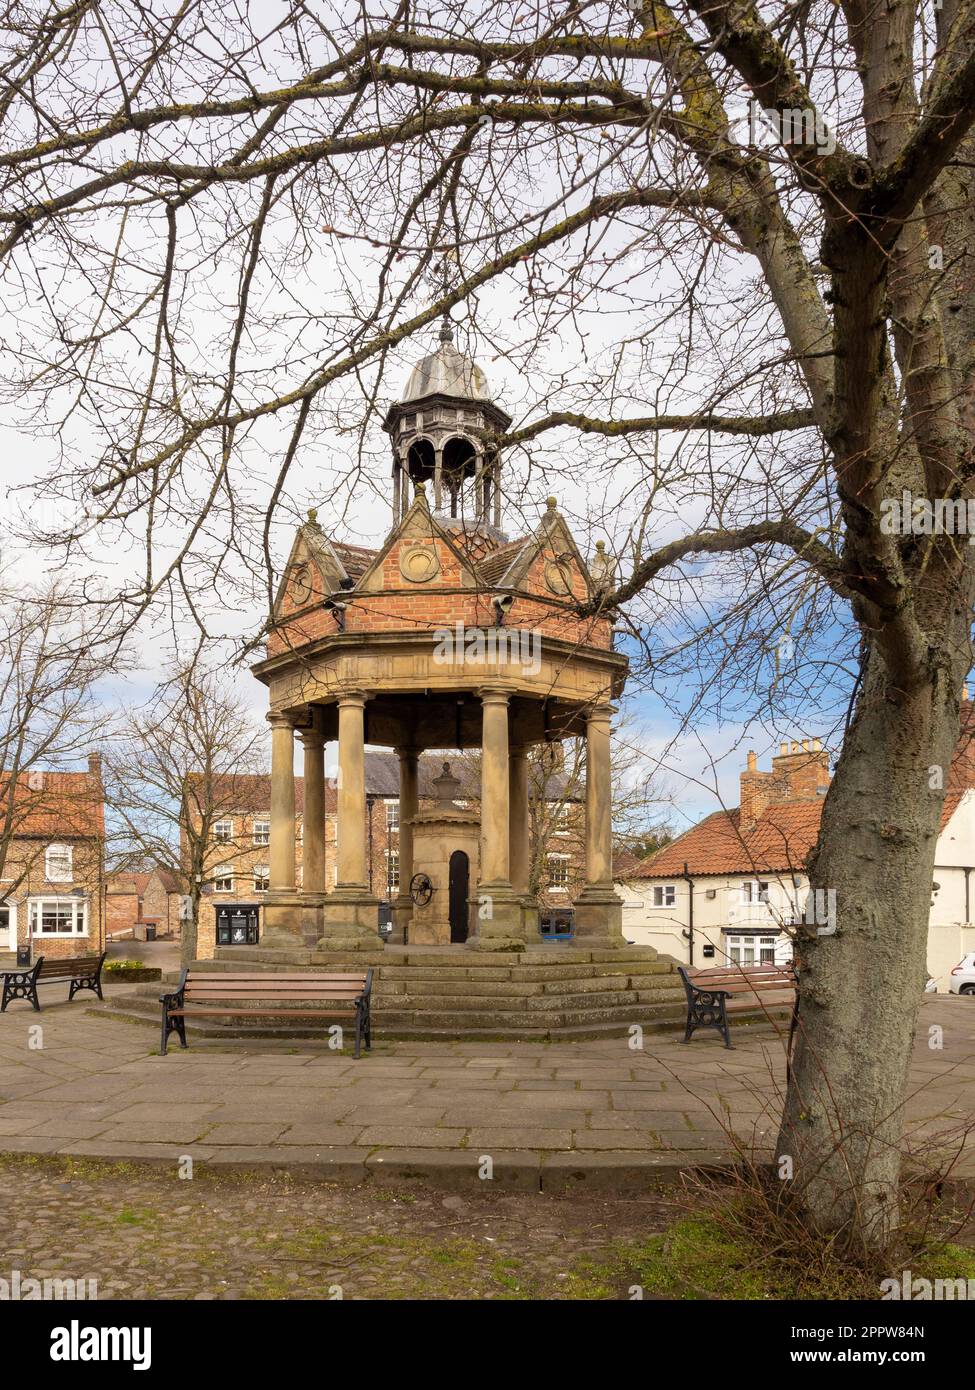 Market Well, grade II listed water well situated in St James Square in Boroughbridge, North Yorkshire, UK Stock Photo